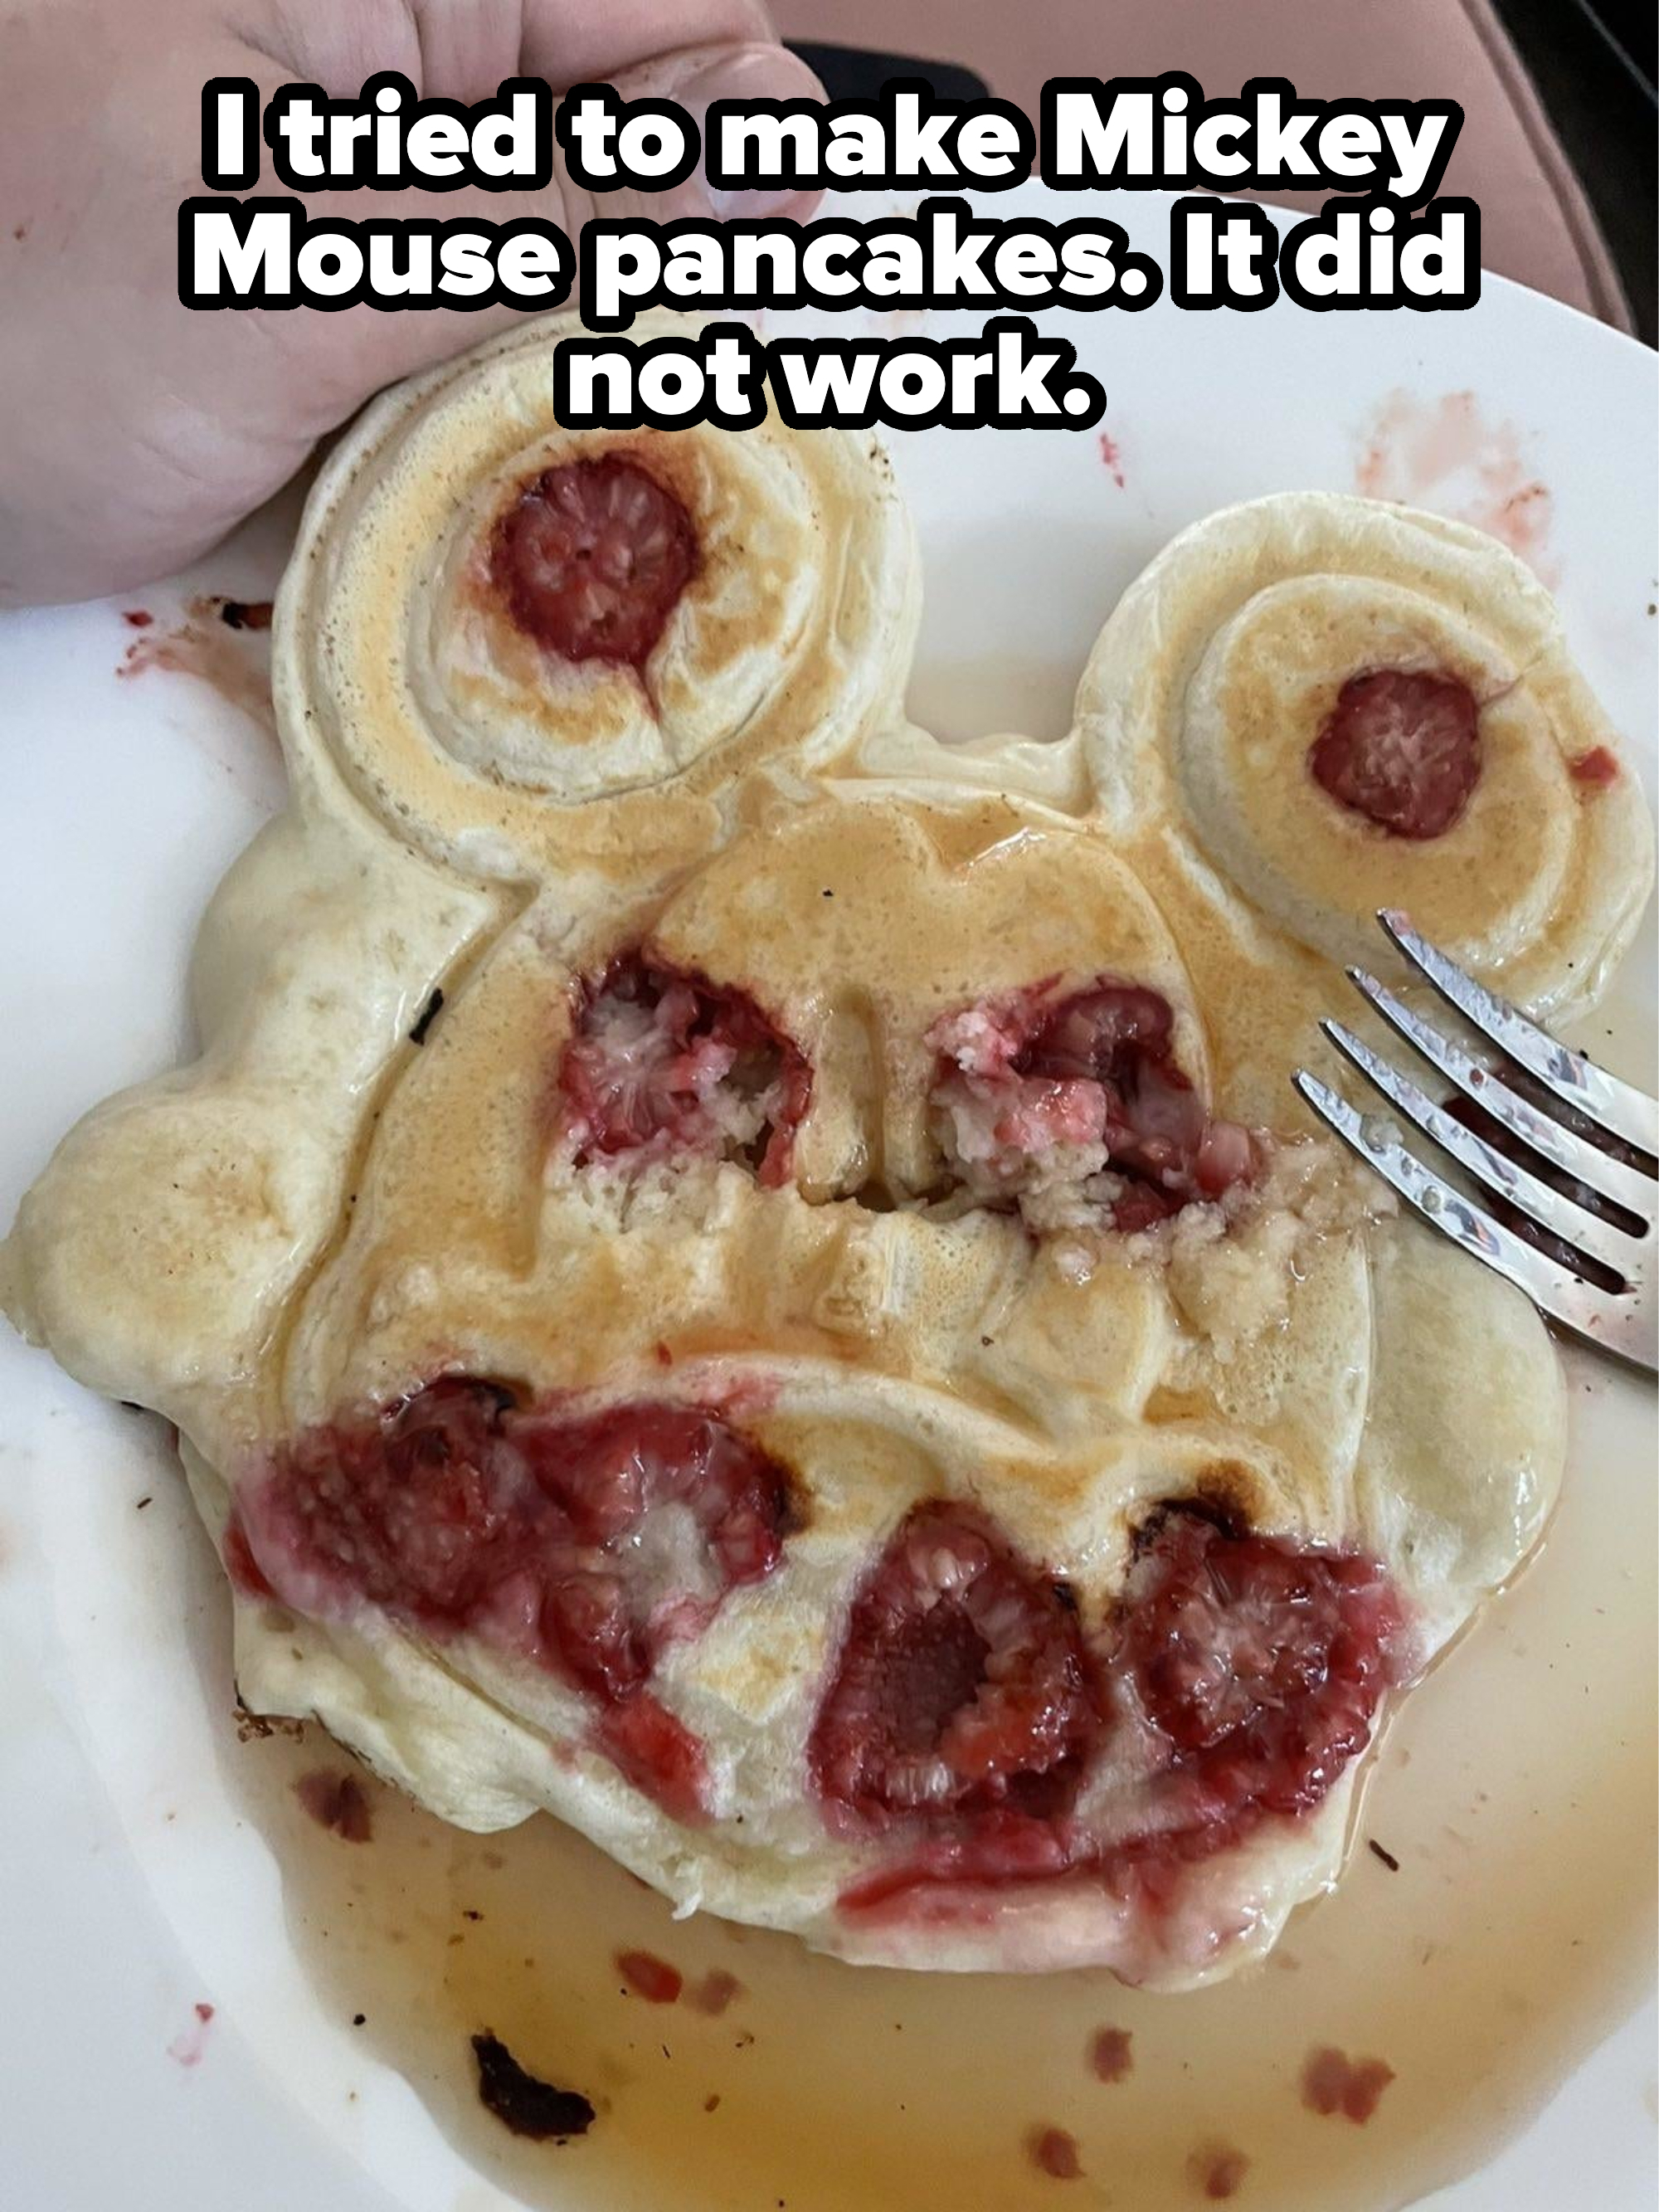 Pancake with smiley face design and embedded strawberries, partially eaten, on a plate with a fork